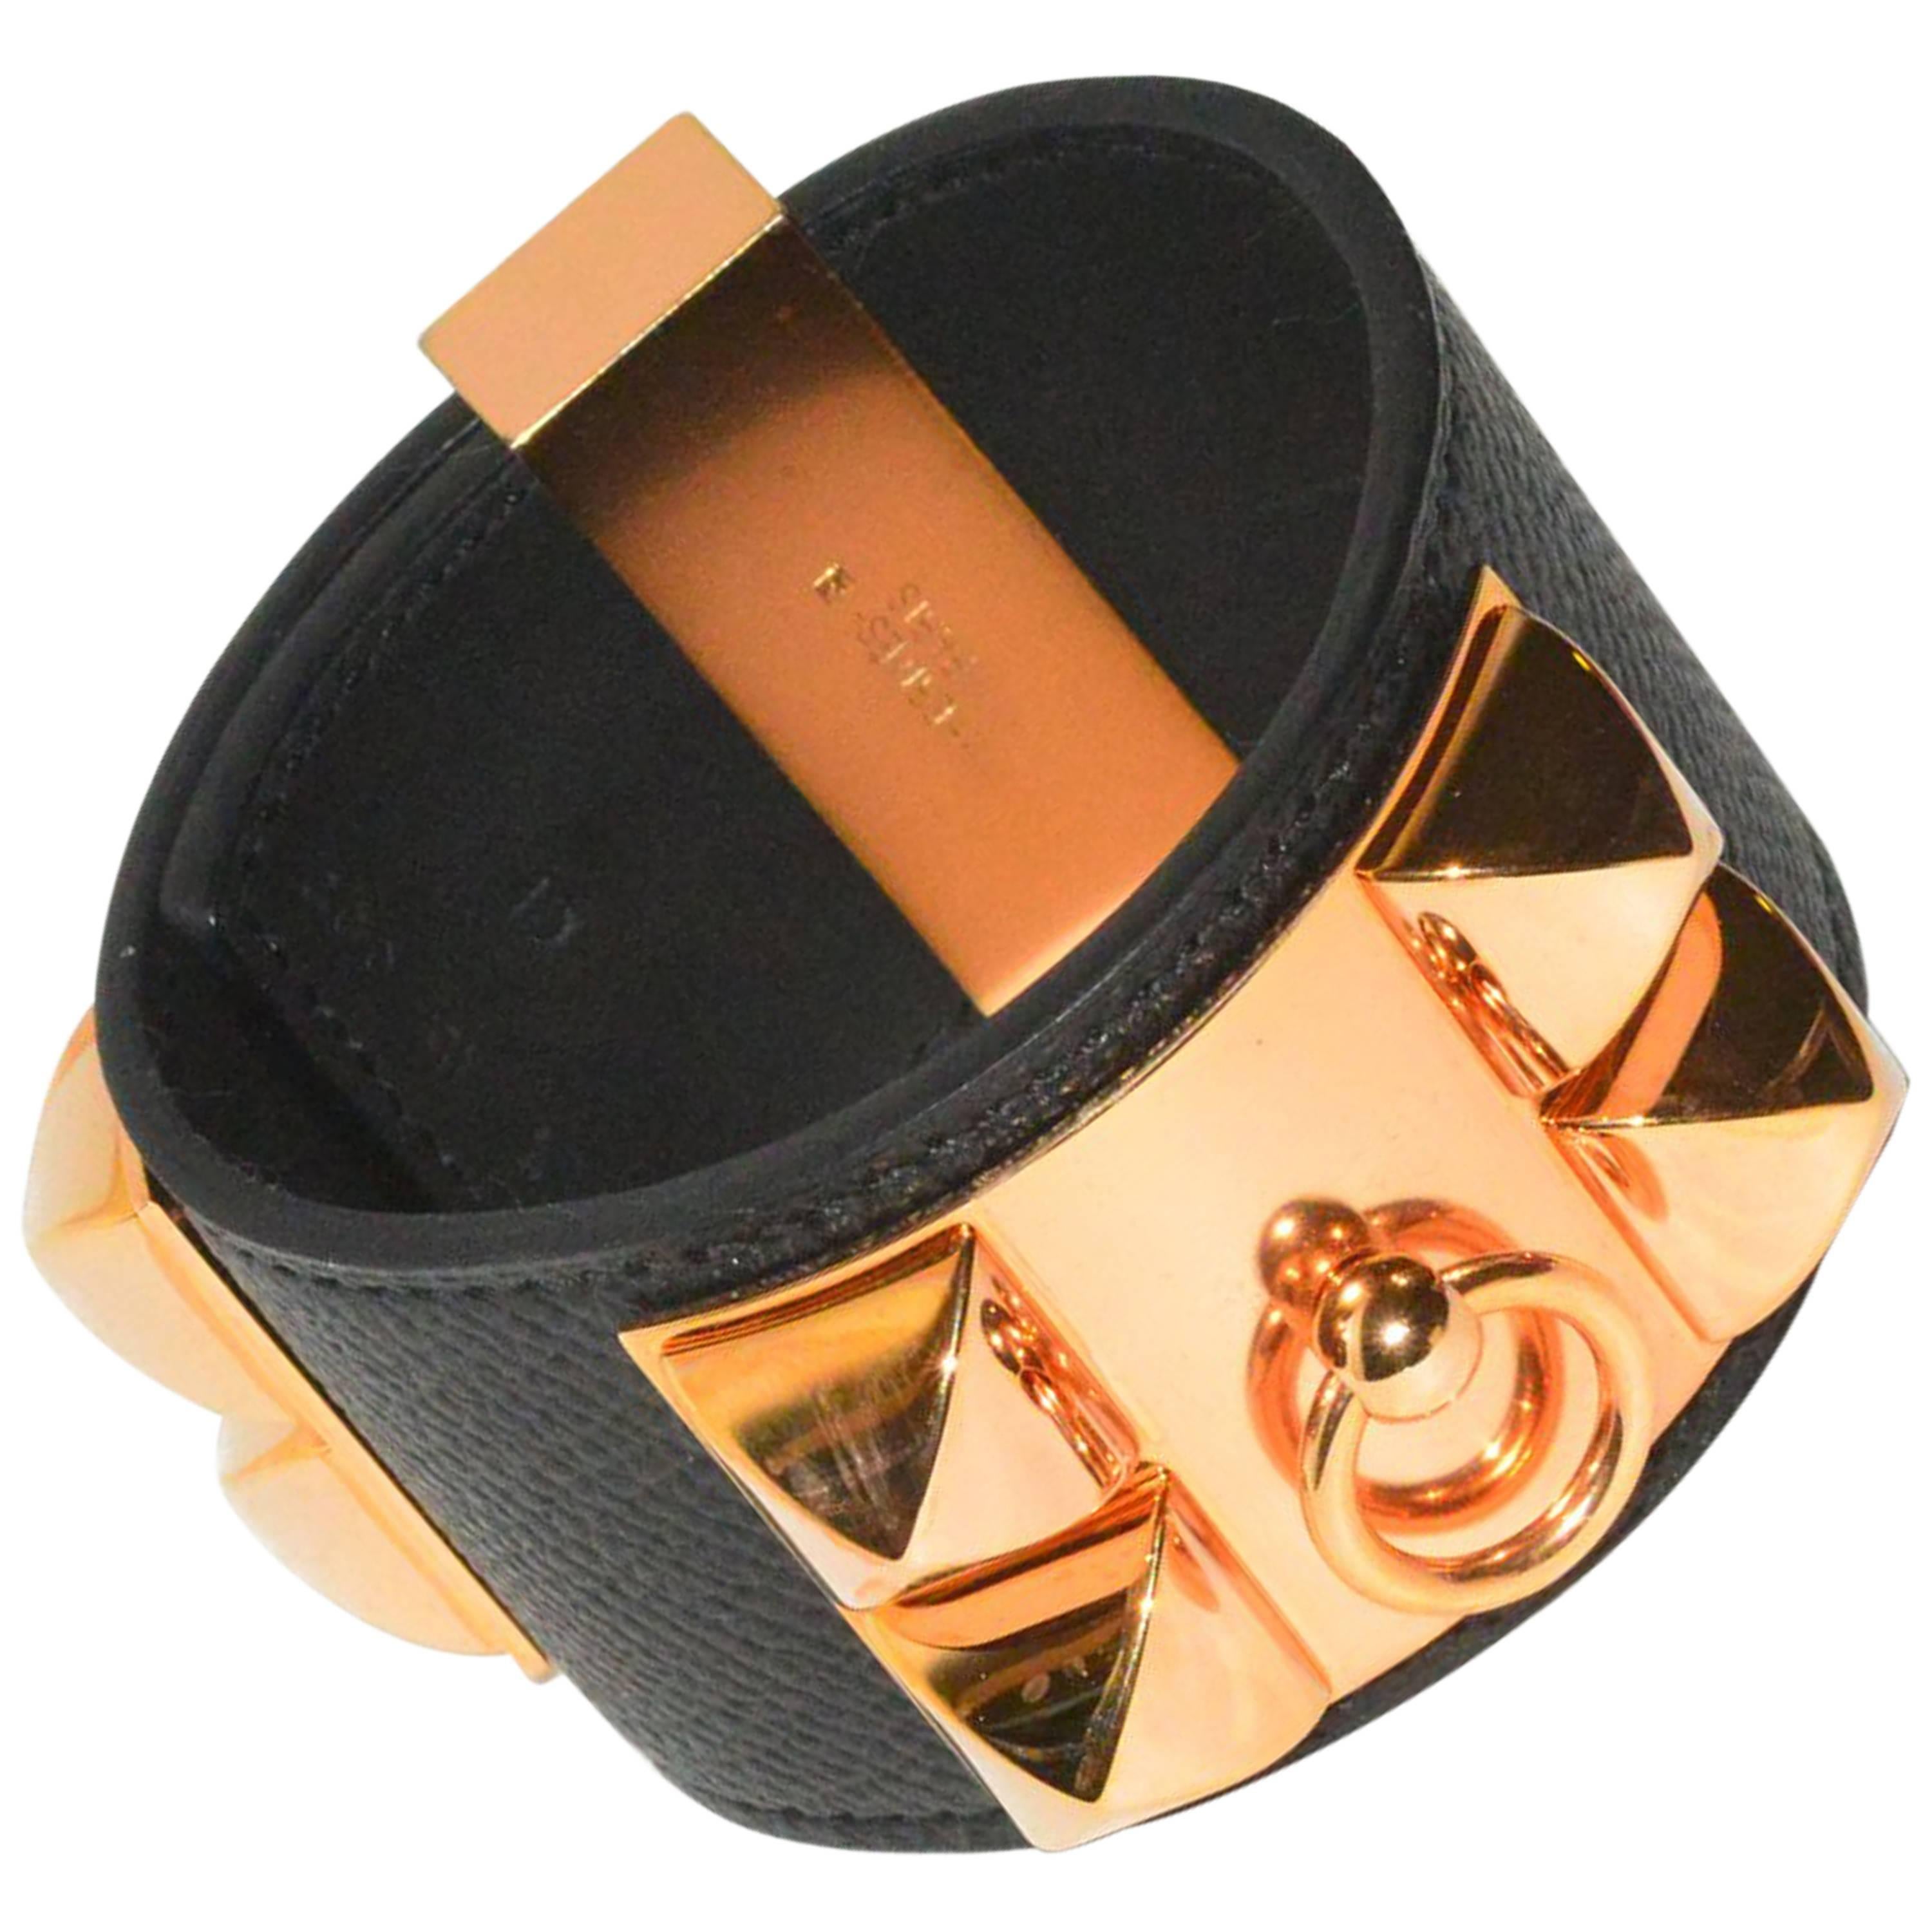 Iconic Hermes Pink Gold Collier de Chien bracelet with Black Leather